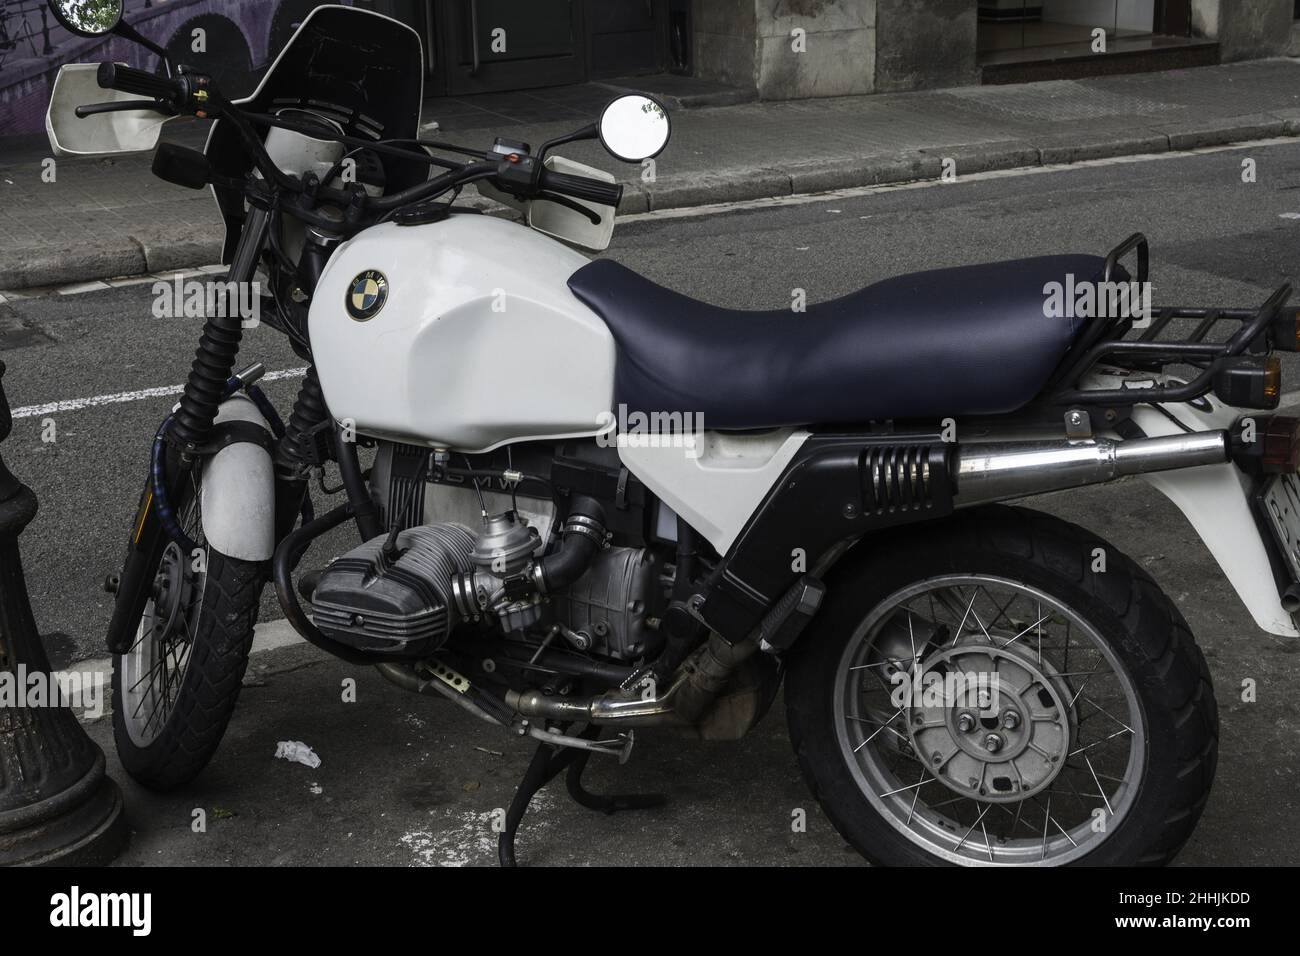 Old BMW R100 motorcycle parked on the city street Stock Photo